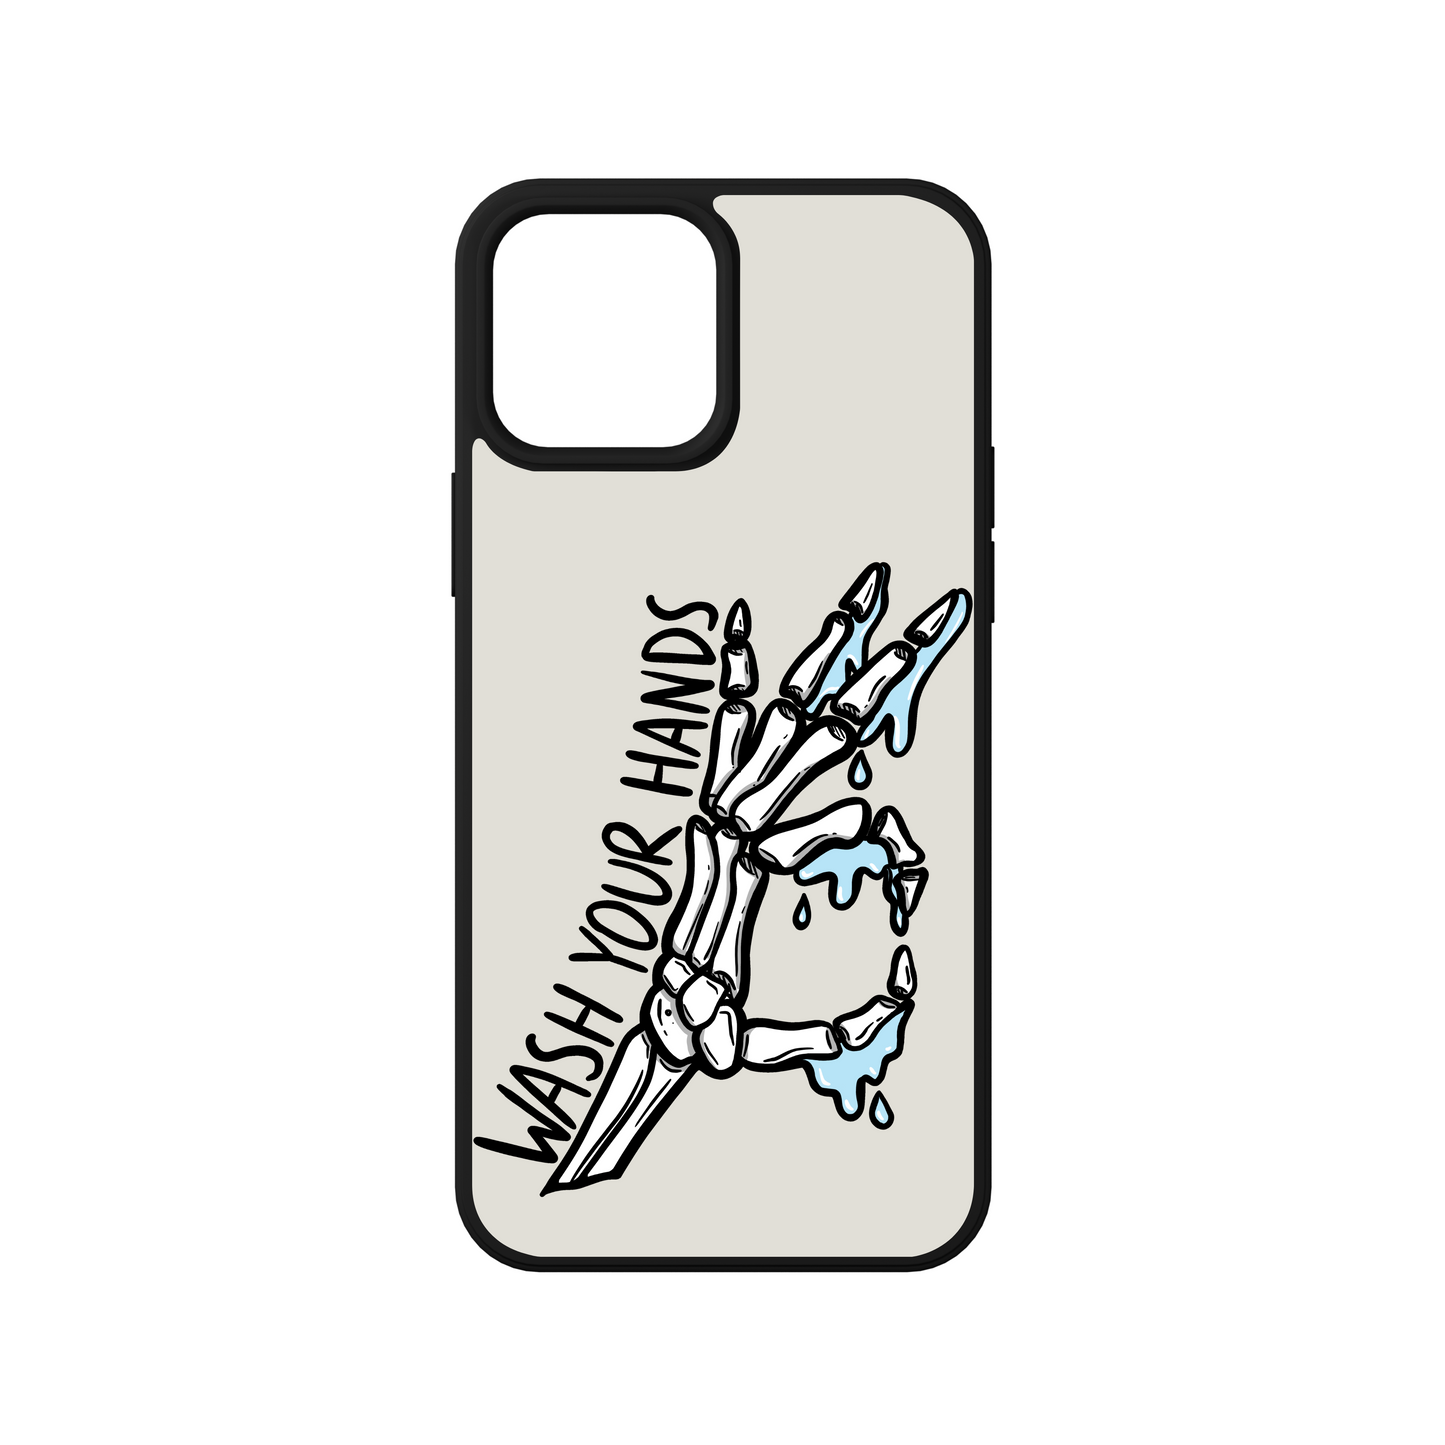 Wash Your Hands iPhone Case